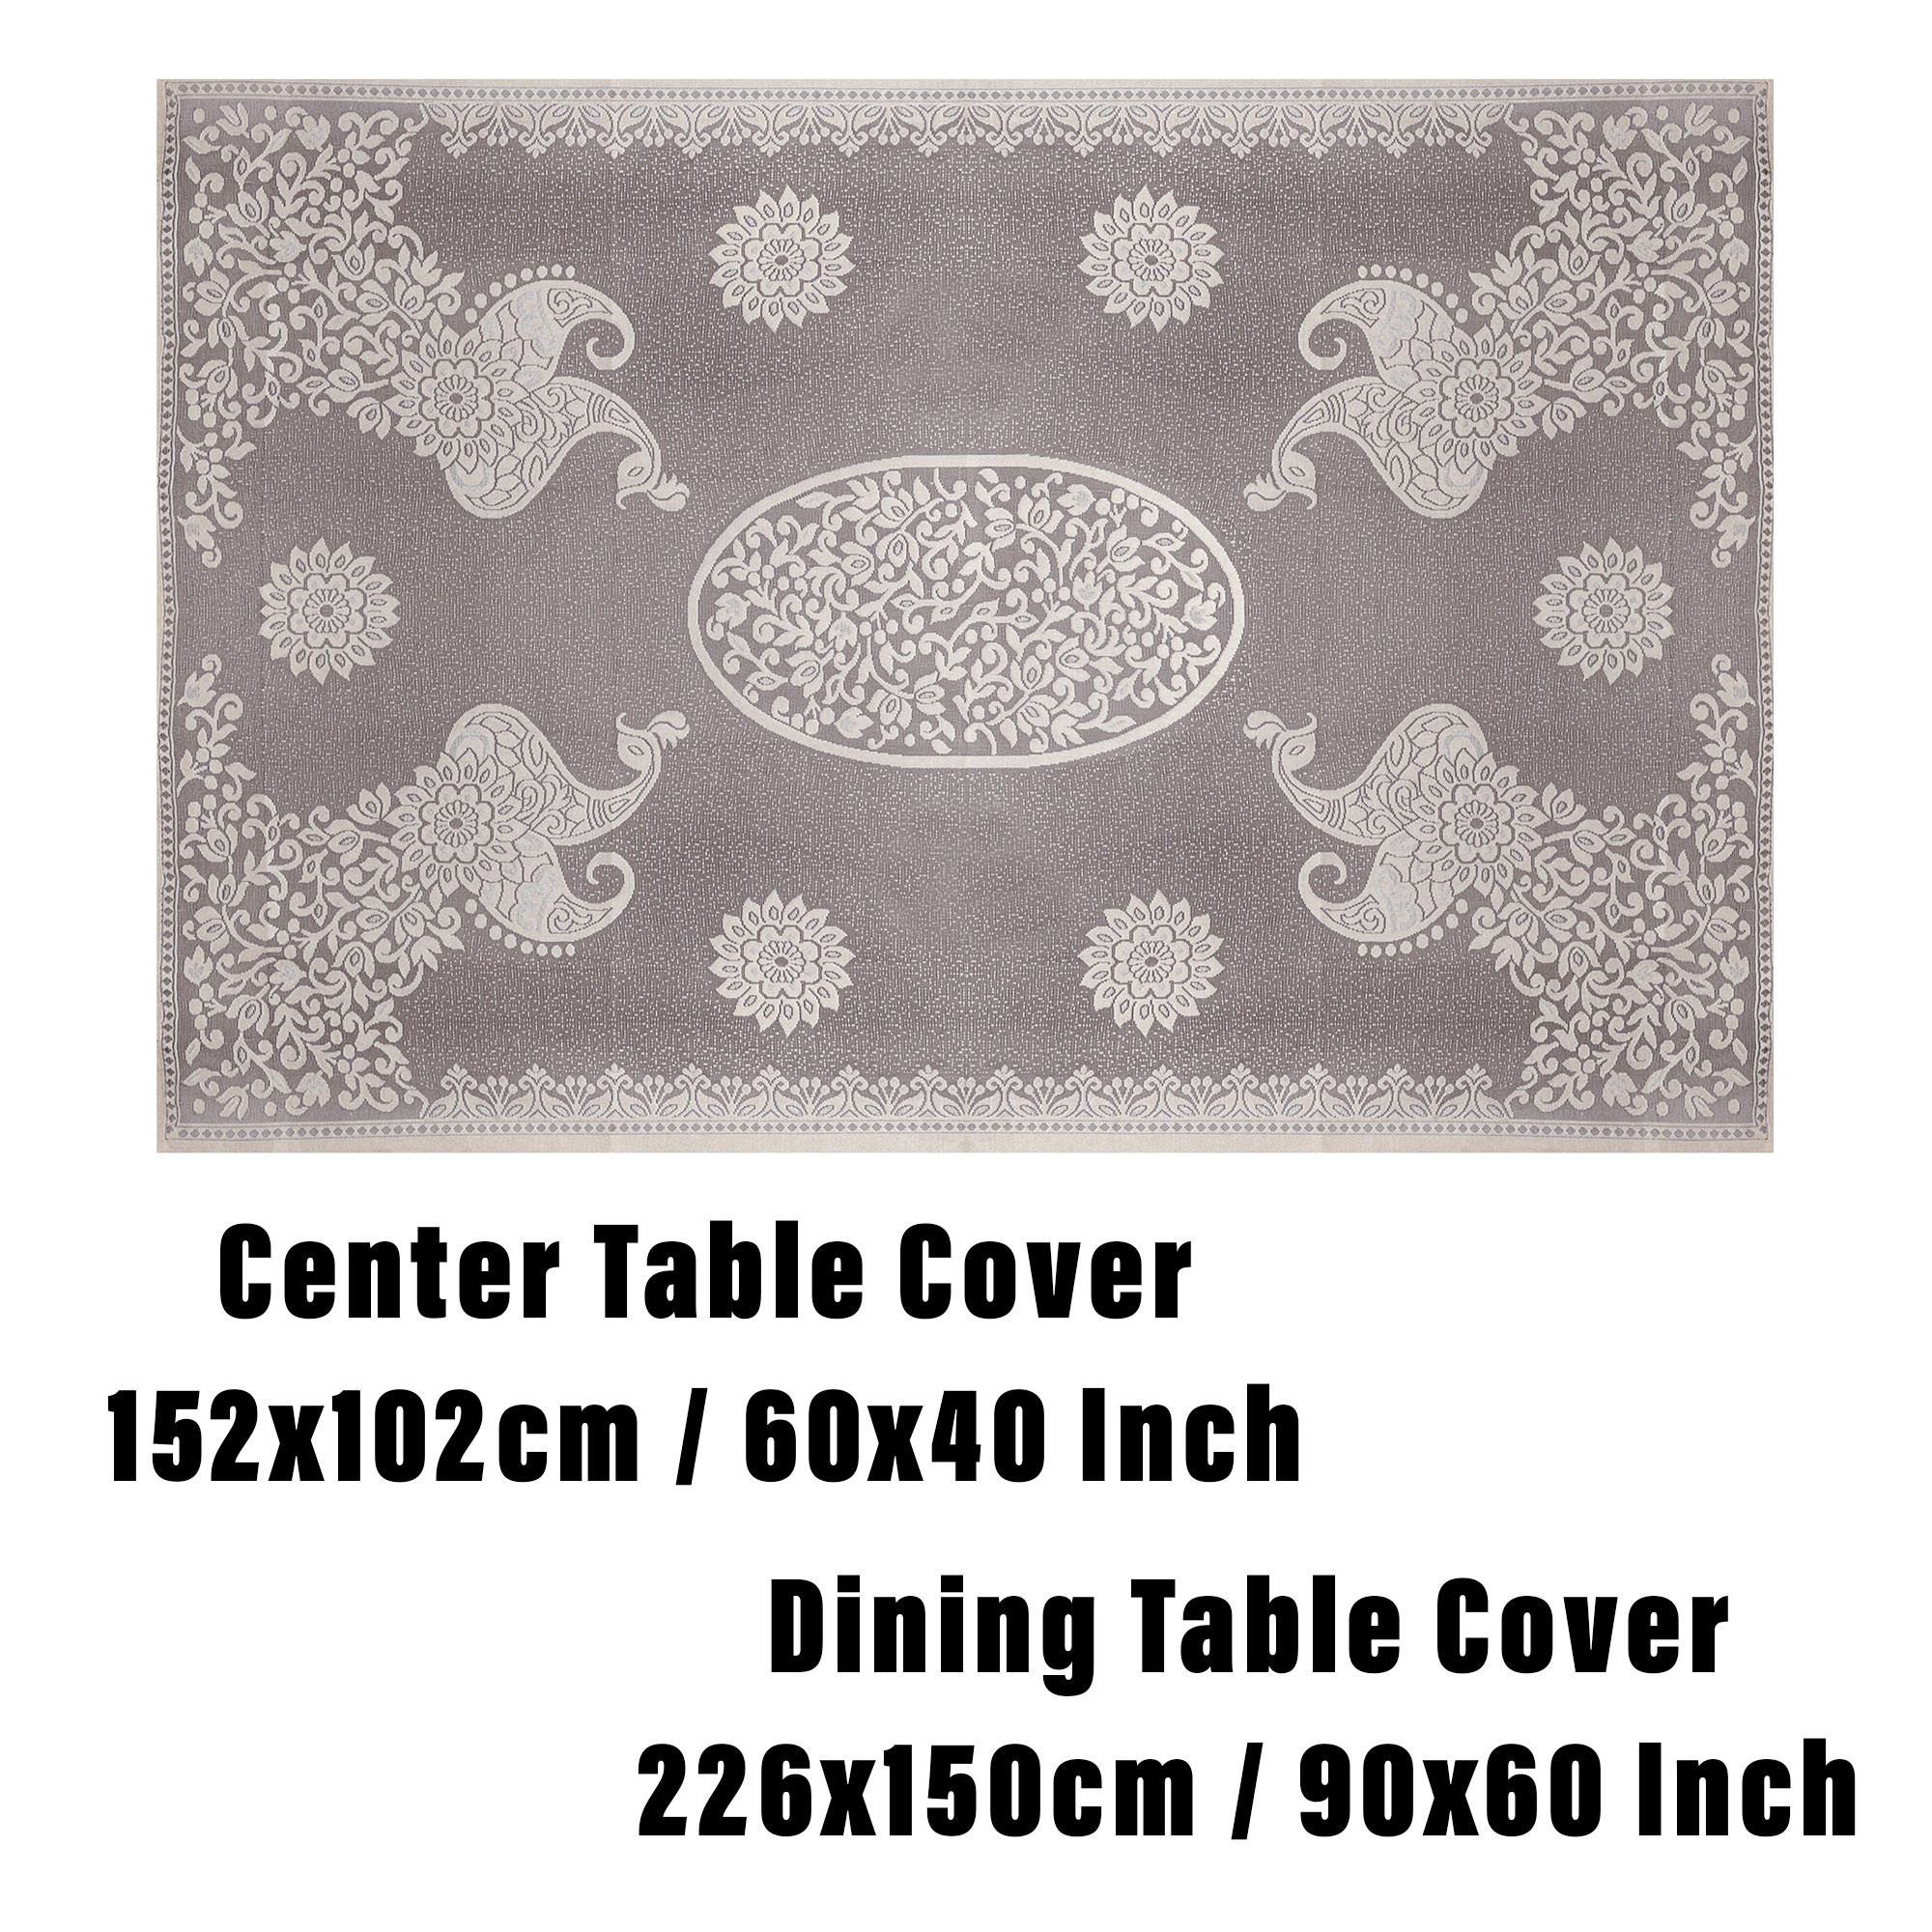 Kuber Industries Center & Dining Table Cover Set | Center & Dining Table Combo Set | Table Cover for Dining & Center | Table Protector Cover | Peacock Table Cover | Brown